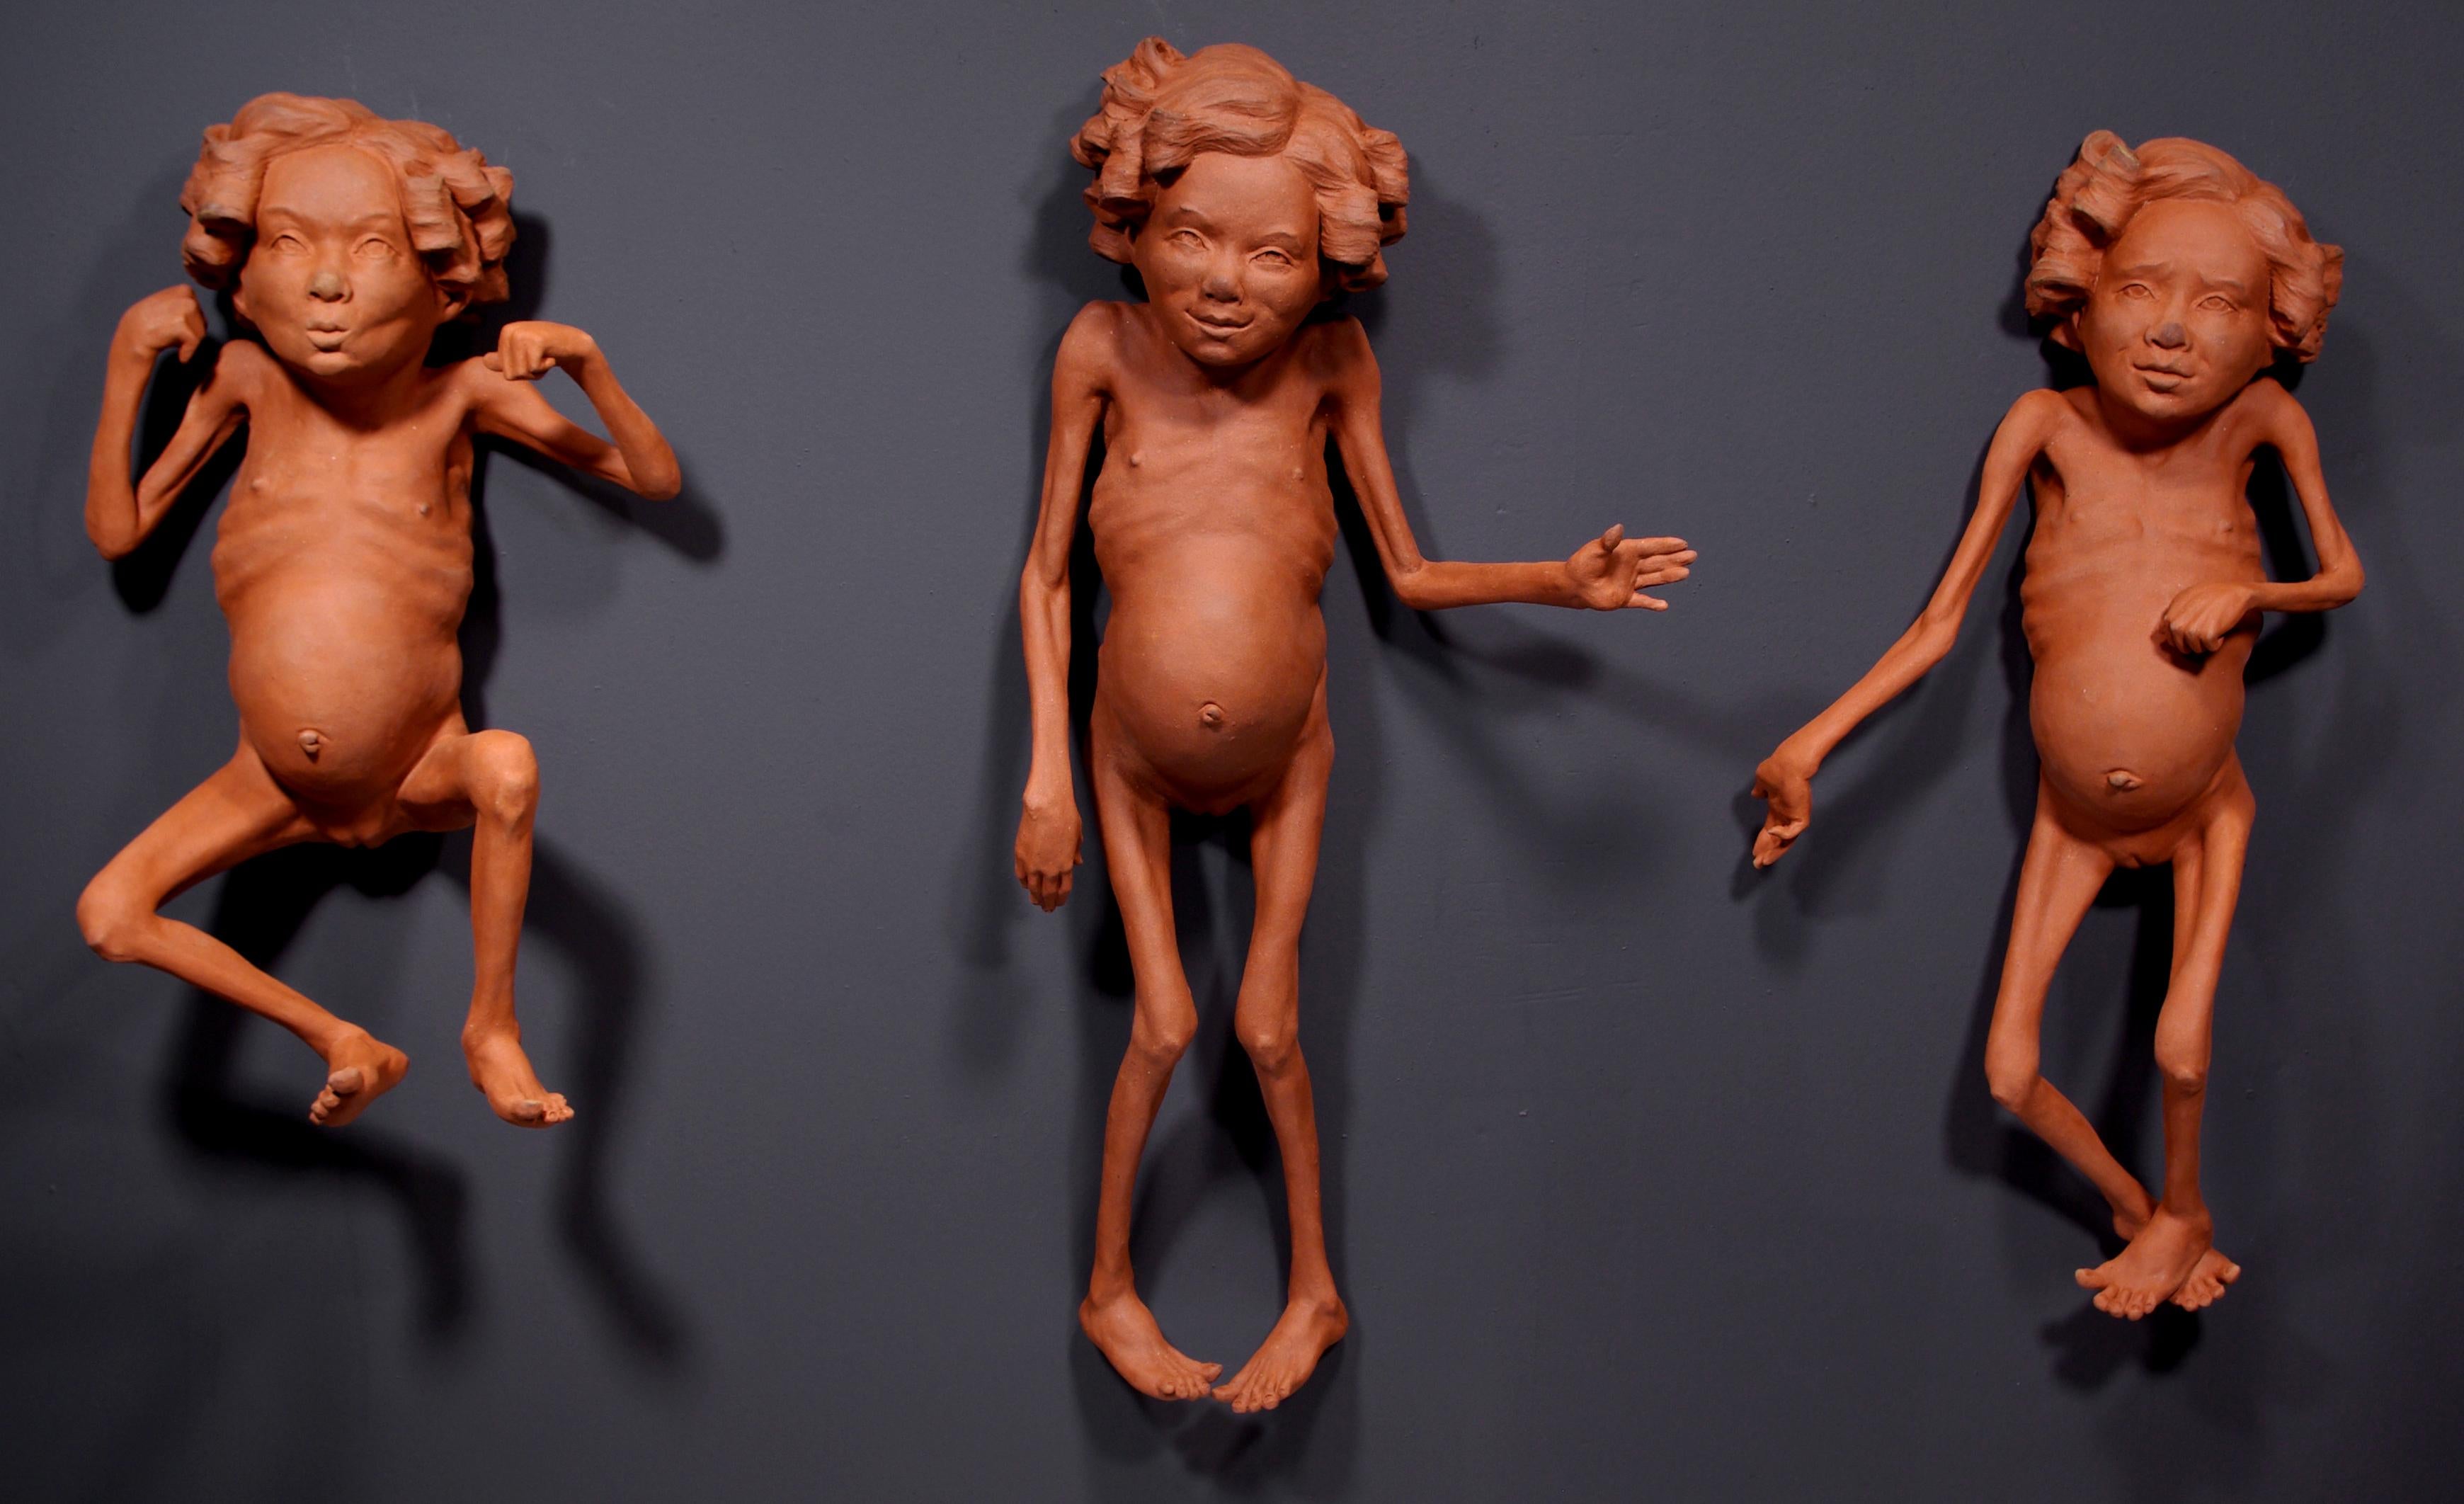 Anne Drew Potter Figurative Sculpture - THE THREE LITTLE GIRLS WITH SHIRLEY TEMPLE CURLS - contemporary nude sculpture